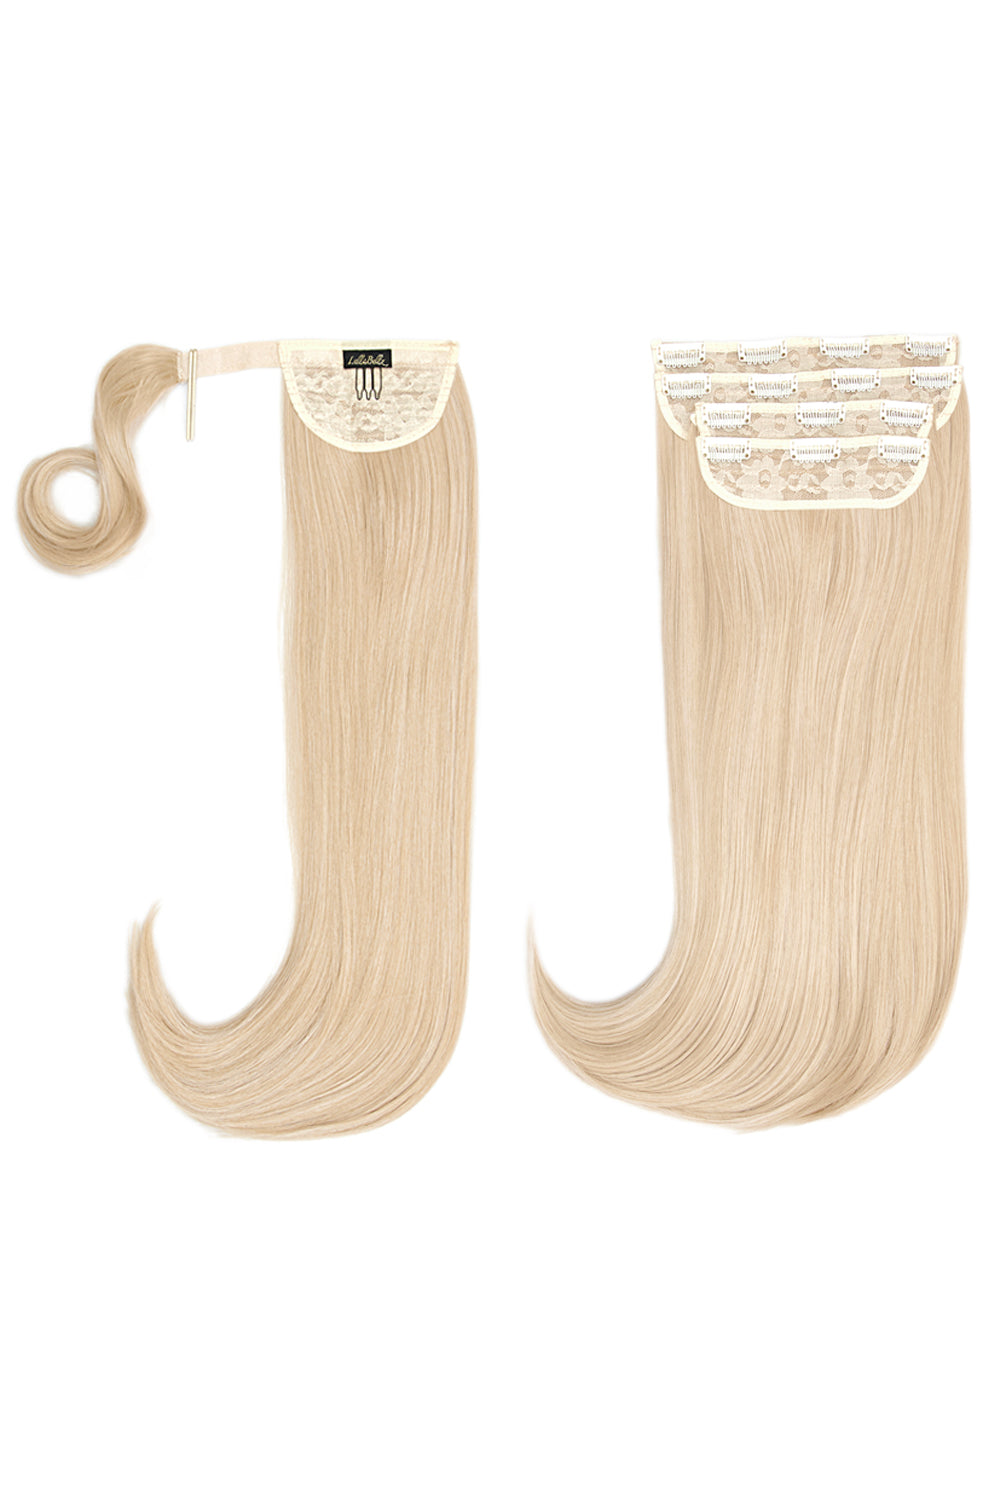 Ultimate Half Up Half Down 22’’ Straight Extension and Pony Set - Light Golden Blonde